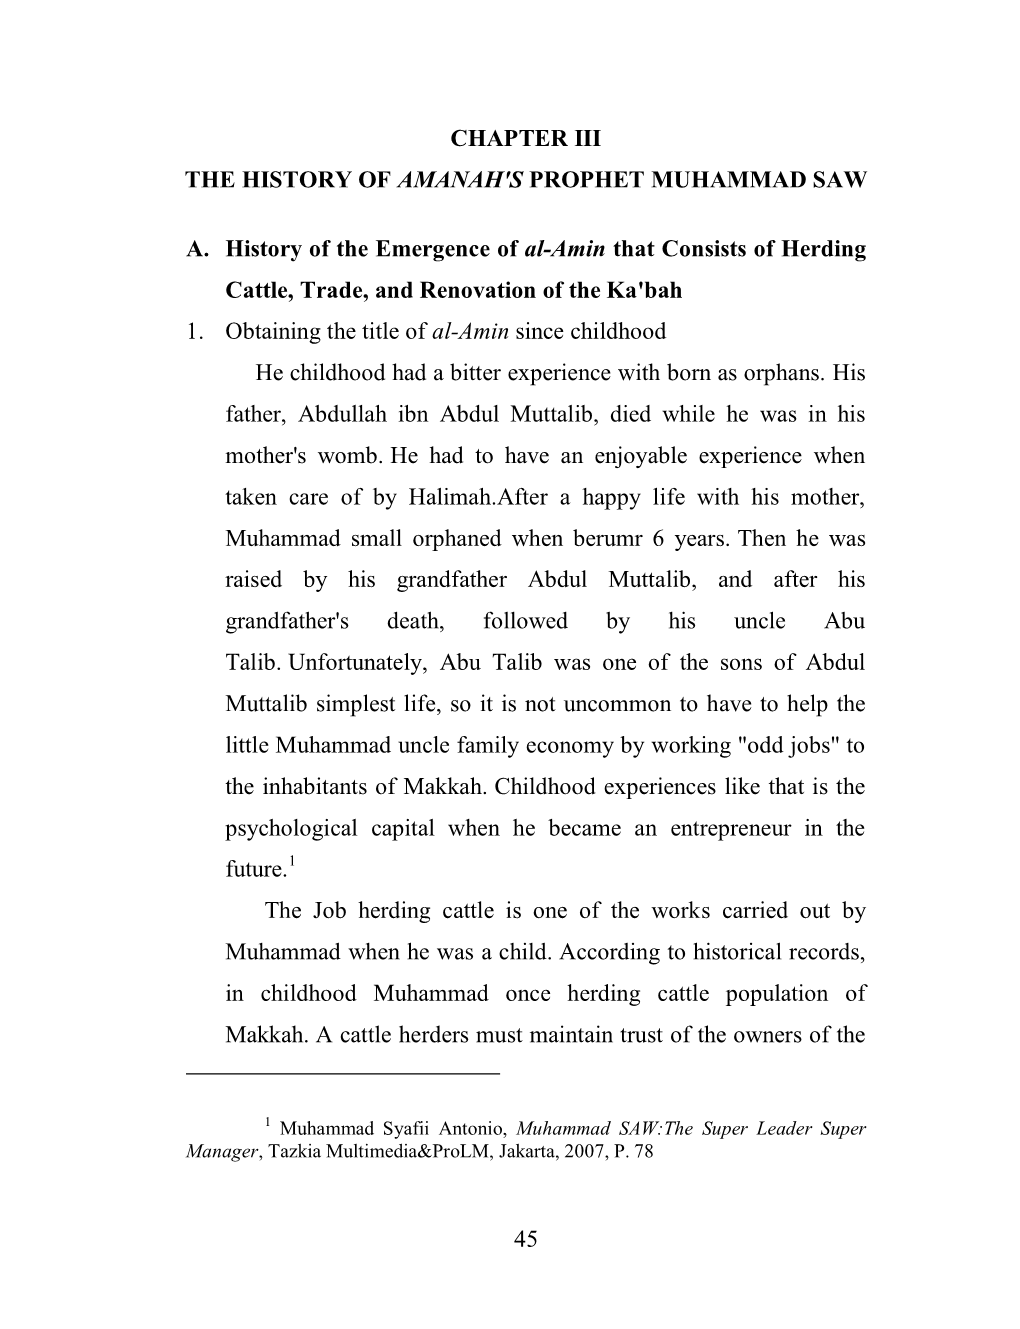 45 CHAPTER III the HISTORY of AMANAH's PROPHET MUHAMMAD SAW A. History of the Emergence of Al-Amin That Consists of Herding